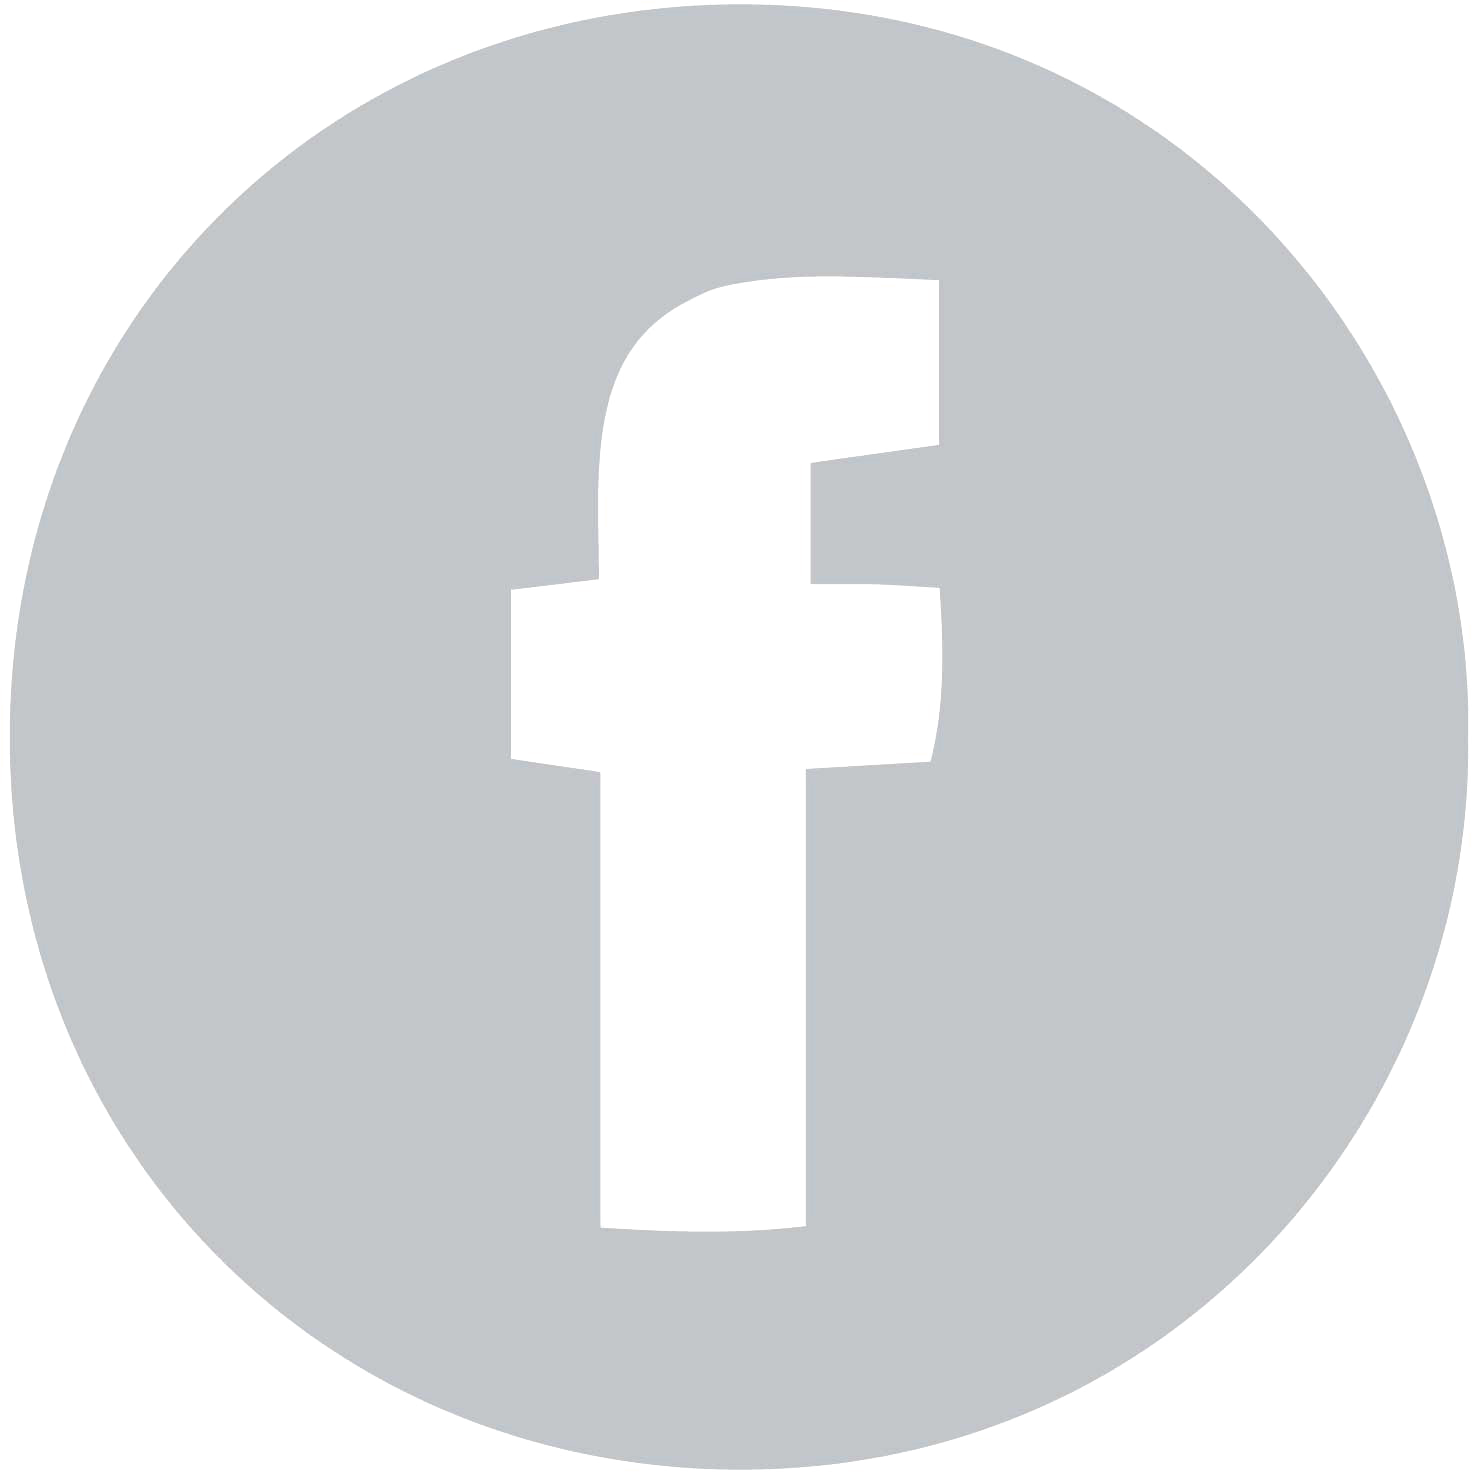 Best Photos Of Fb Icon White - Facebook Icon Grey Transparent Background (1472x1472), Png Download